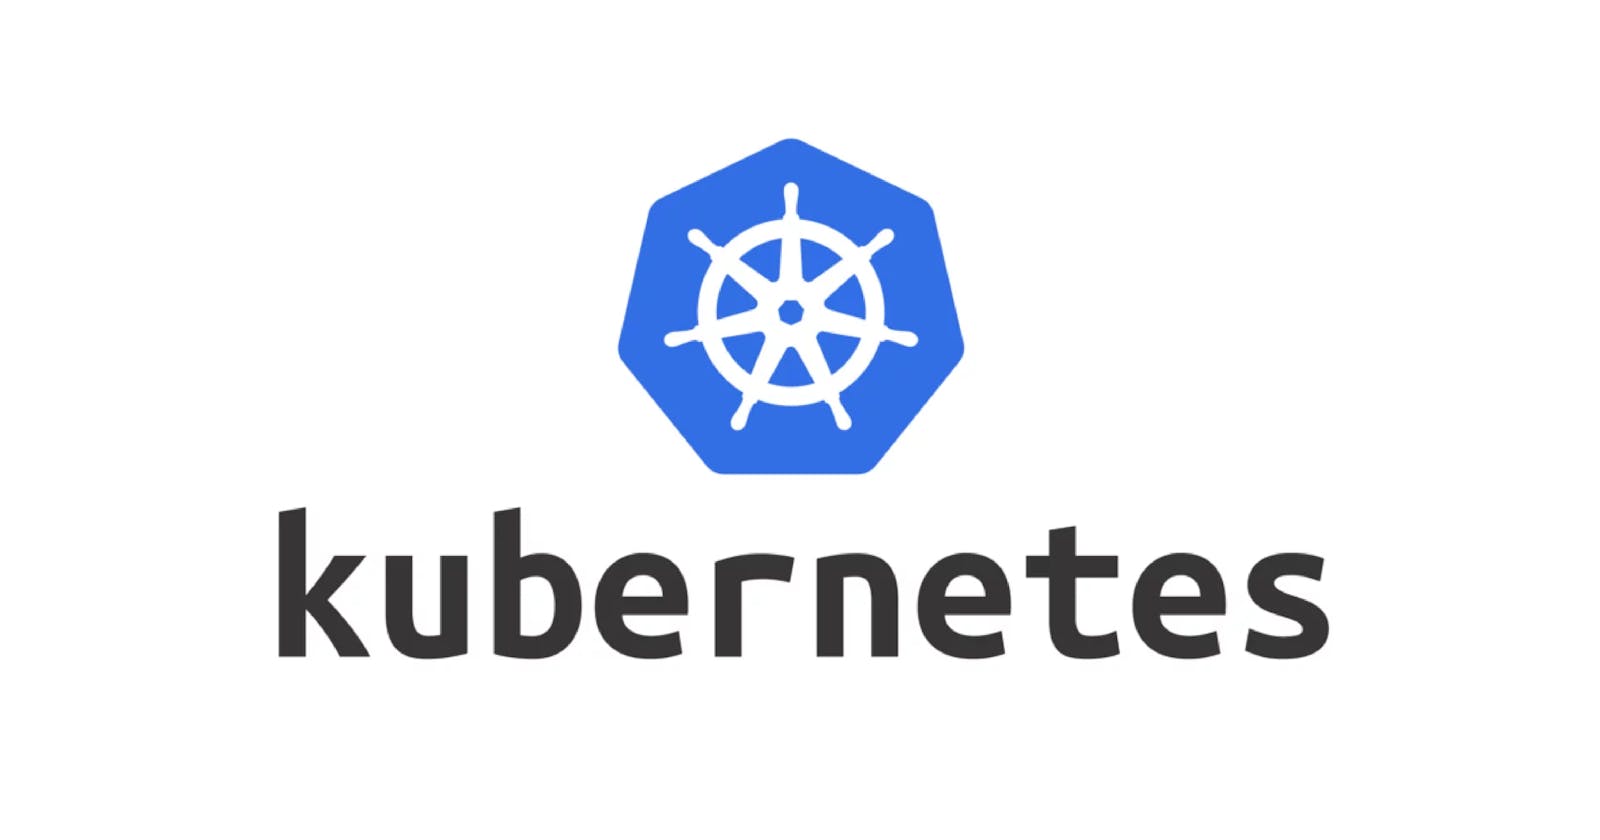 Day 30: Introduction to Kubernetes